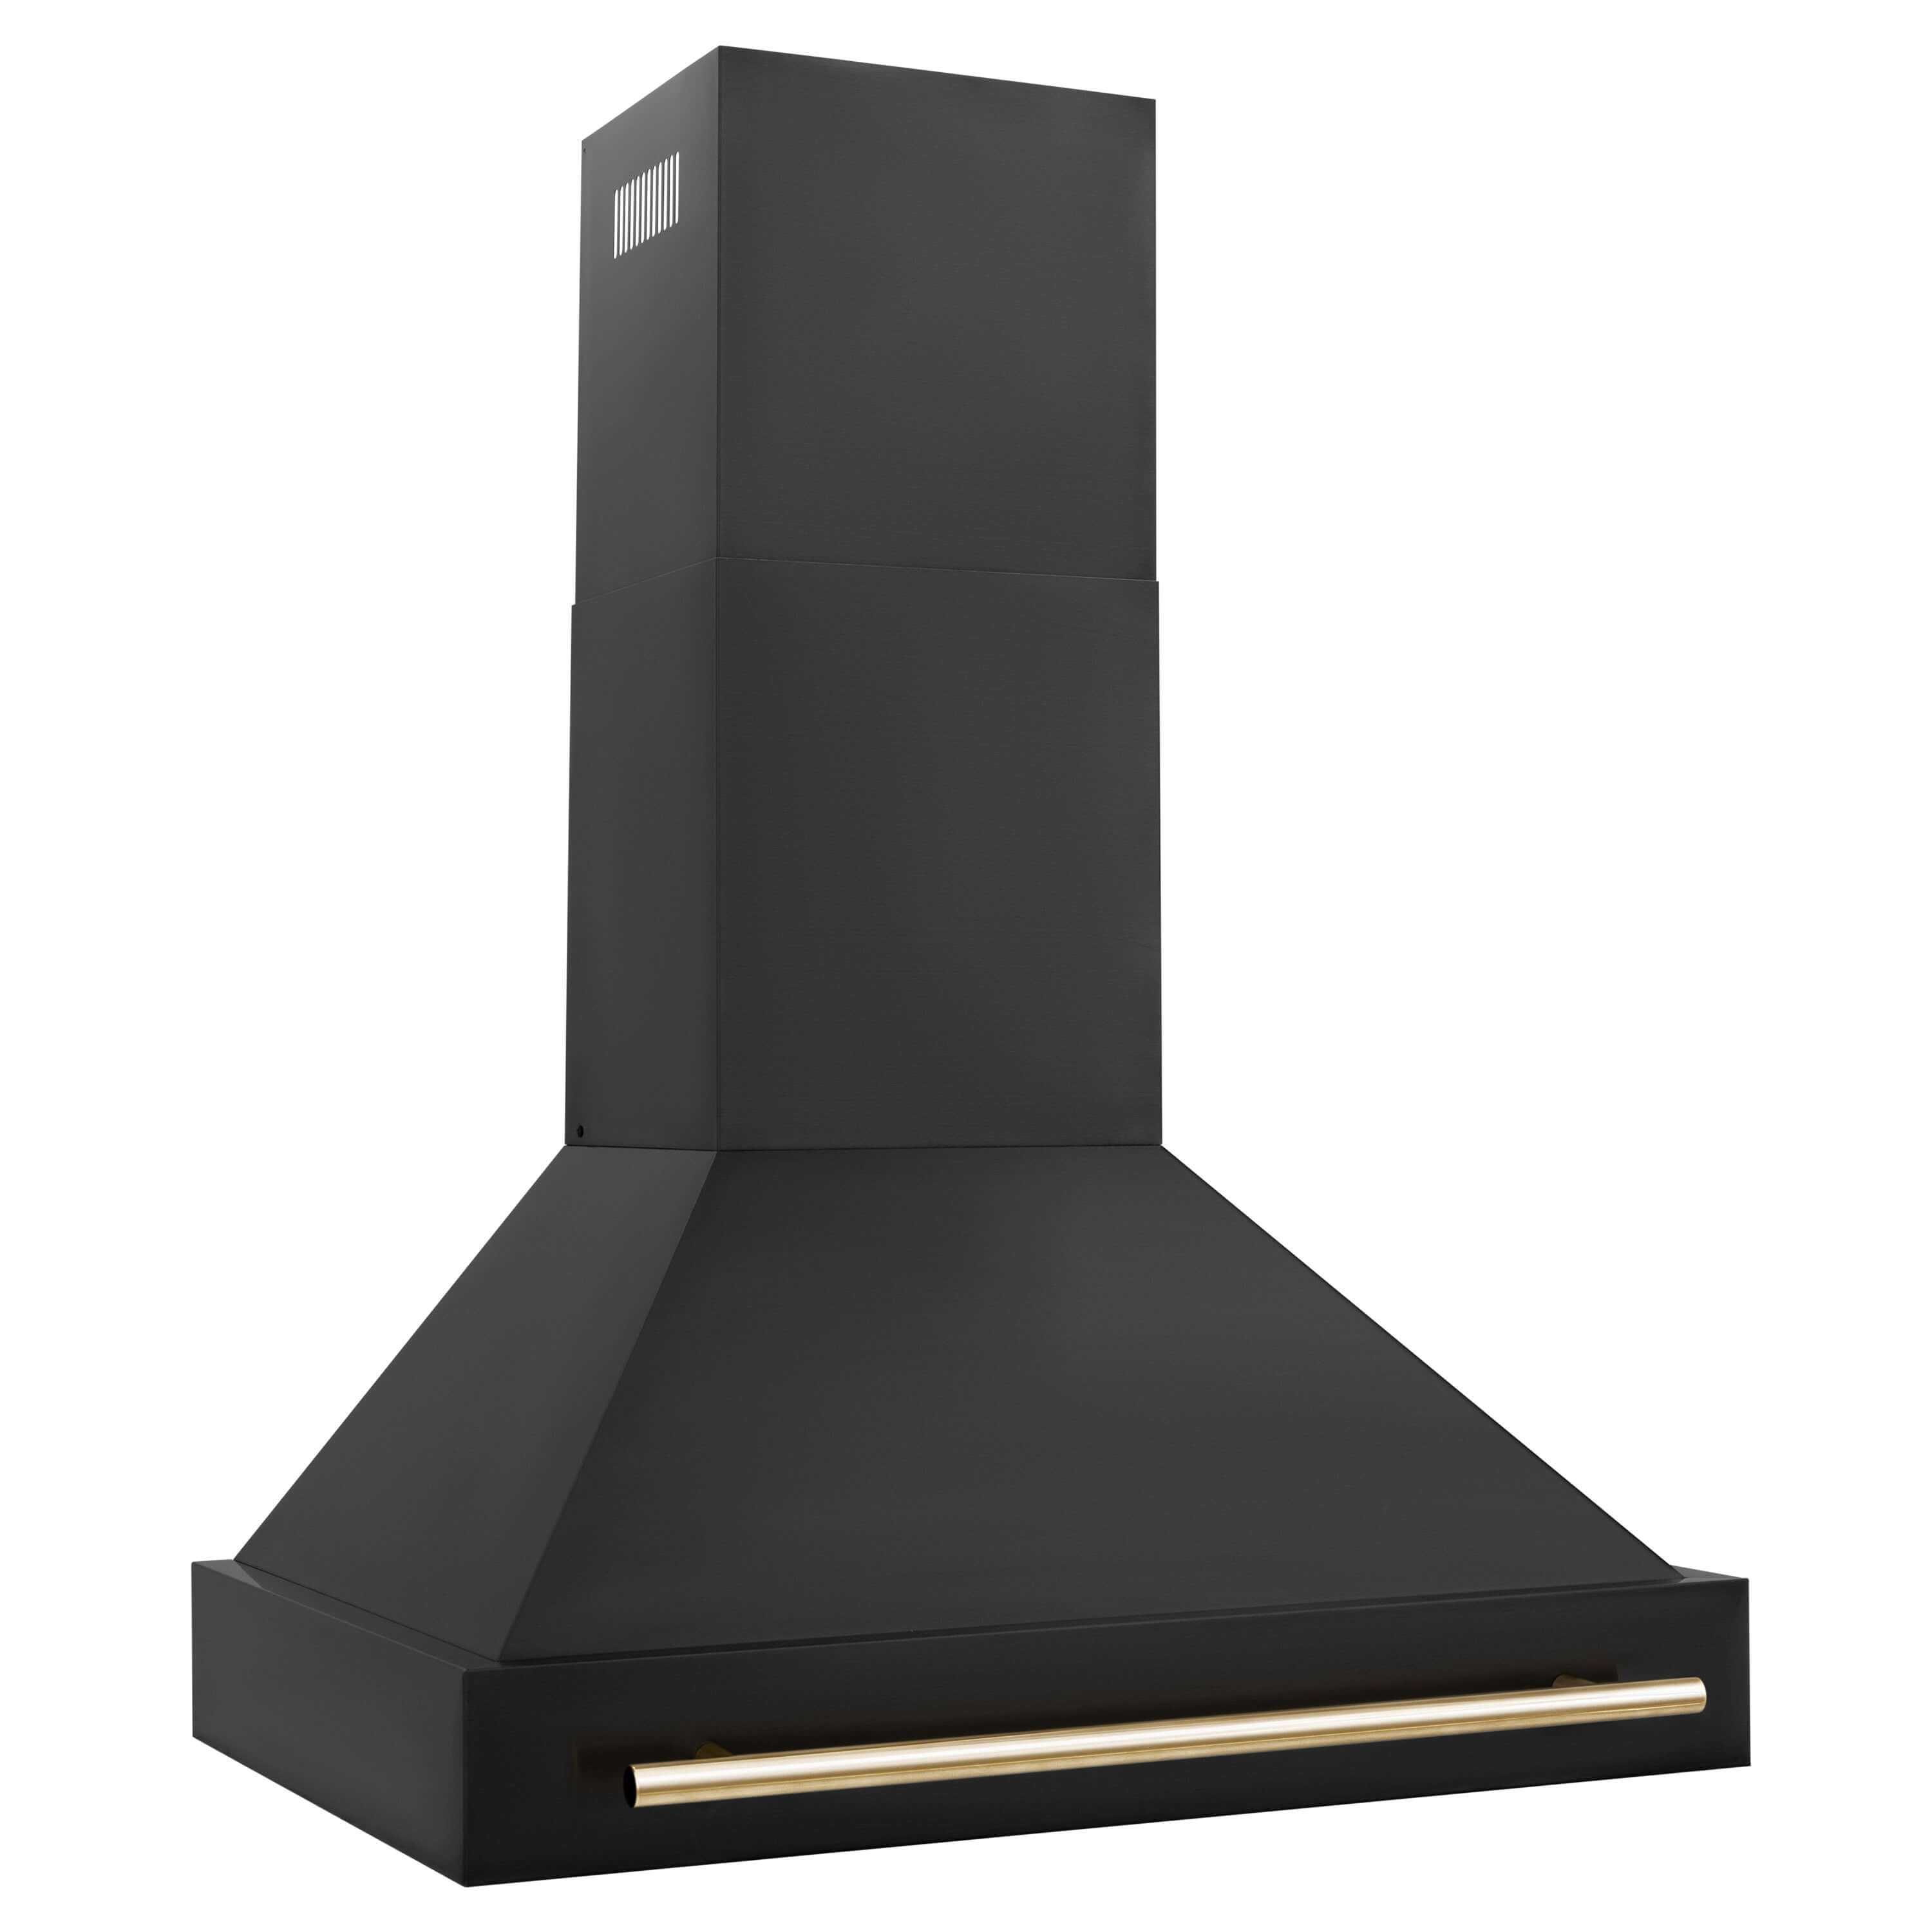 ZLINE Autograph Edition 36 in. Black Stainless Steel Range Hood with Handle (BS655Z-36) Polished Gold side.